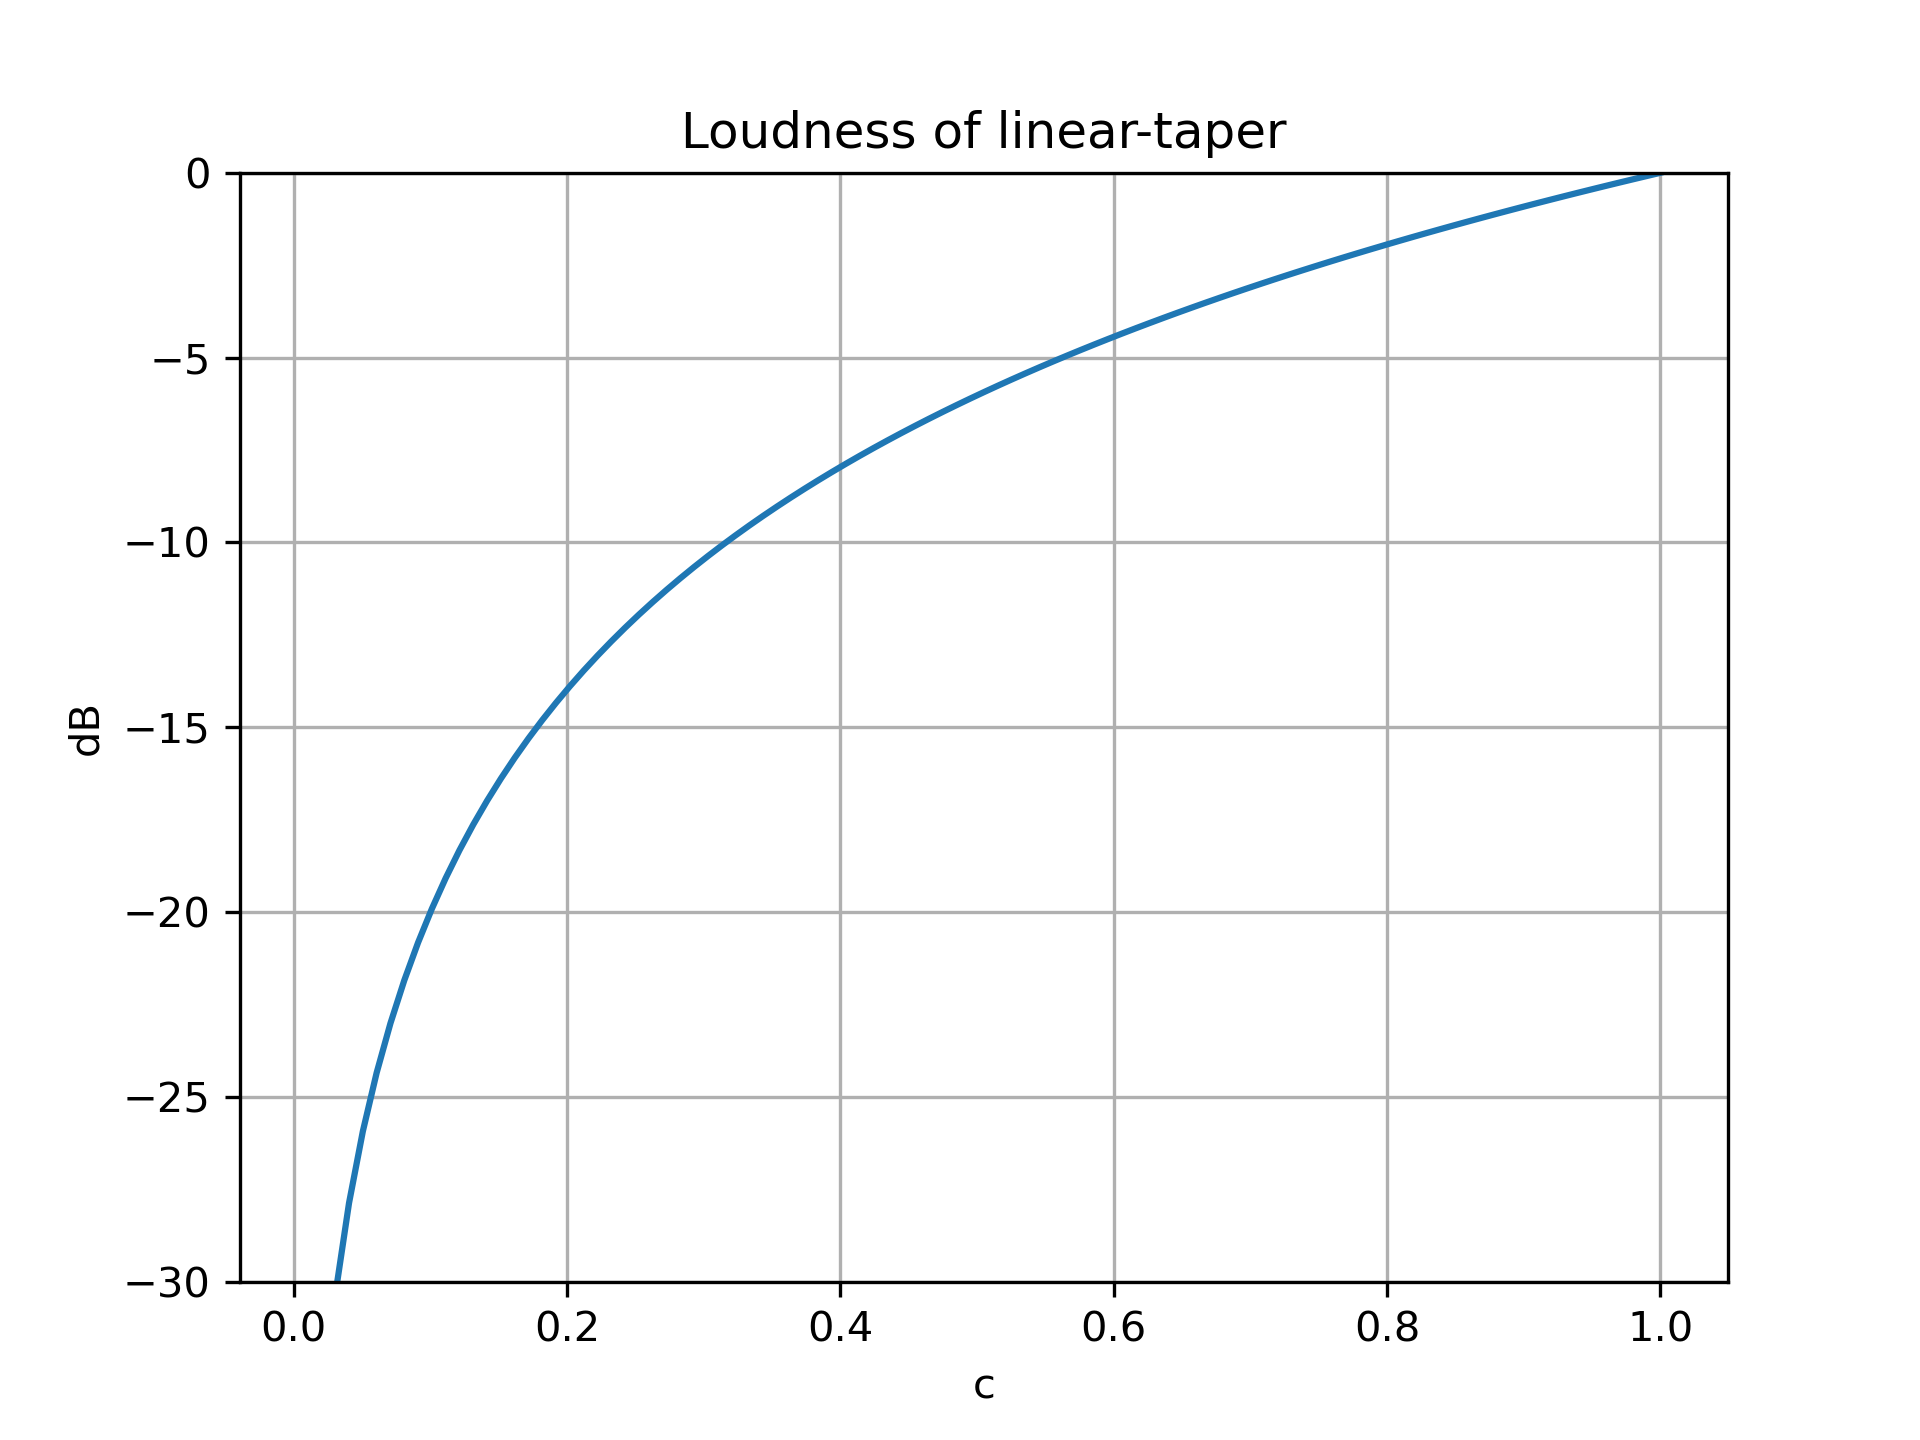 perceived loudness of linear-taper in dB